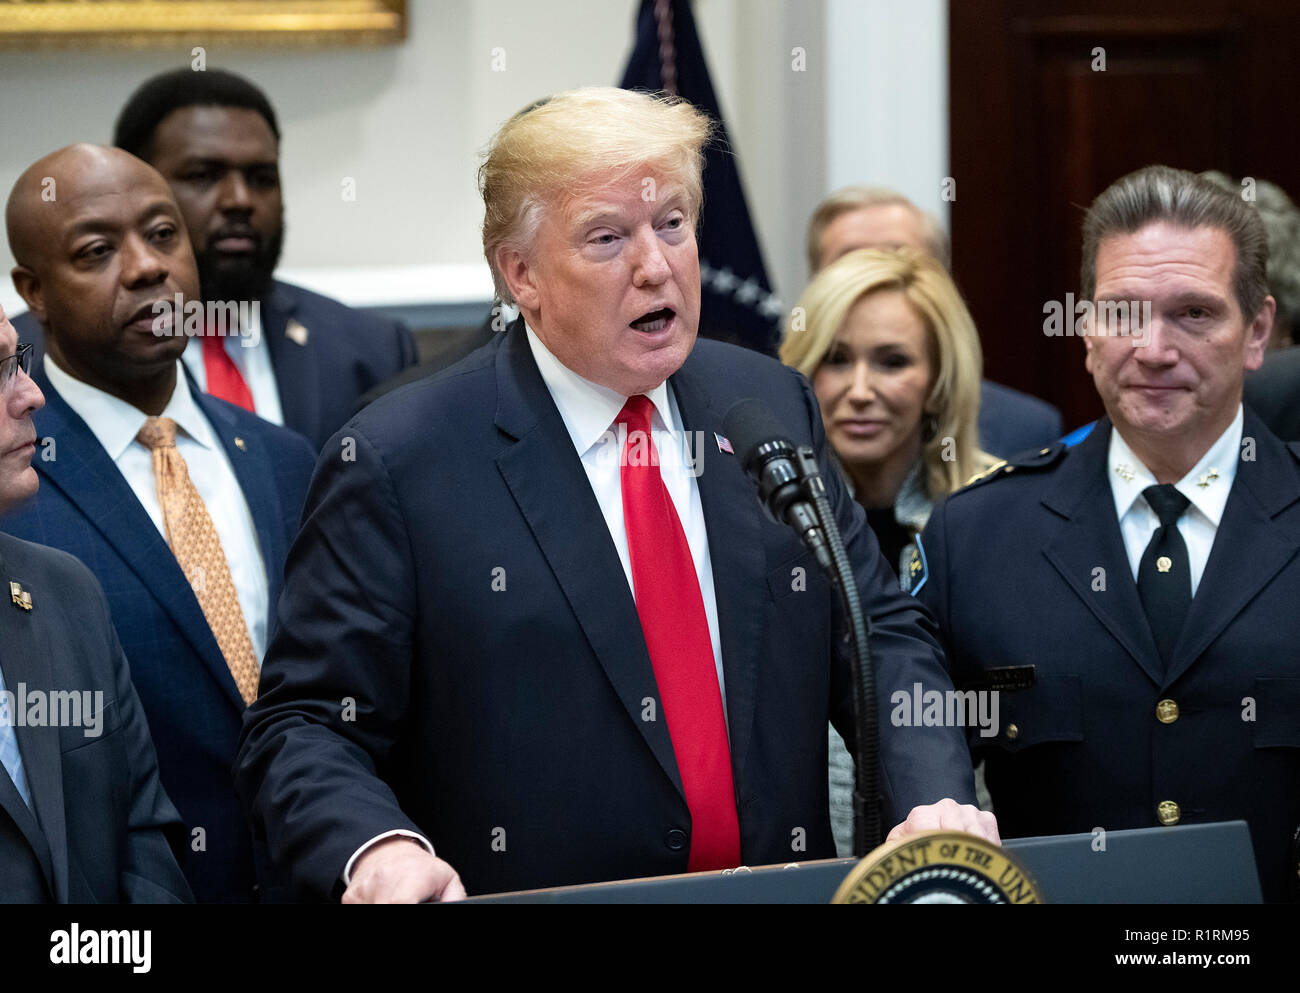 united-states-president-donald-j-trump-announces-his-support-of-h-r-5682-the-first-step-act-in-the-roosevelt-room-of-the-white-house-in-washington-dc-on-wednesday-november-14-2018-according-to-the-website-congressgov-this-bill-is-titled-the-formerly-incarcerated-reenter-society-transformed-safely-transitioning-every-person-act-or-the-first-step-act-it-enjoys-bipartisan-support-looking-on-are-us-senator-tim-scott-republican-of-south-carolina-left-and-chief-paul-cell-president-international-association-of-chiefs-of-police-right-credit-ron-sachscnp-usage-worldwide-R1RM95.jpg